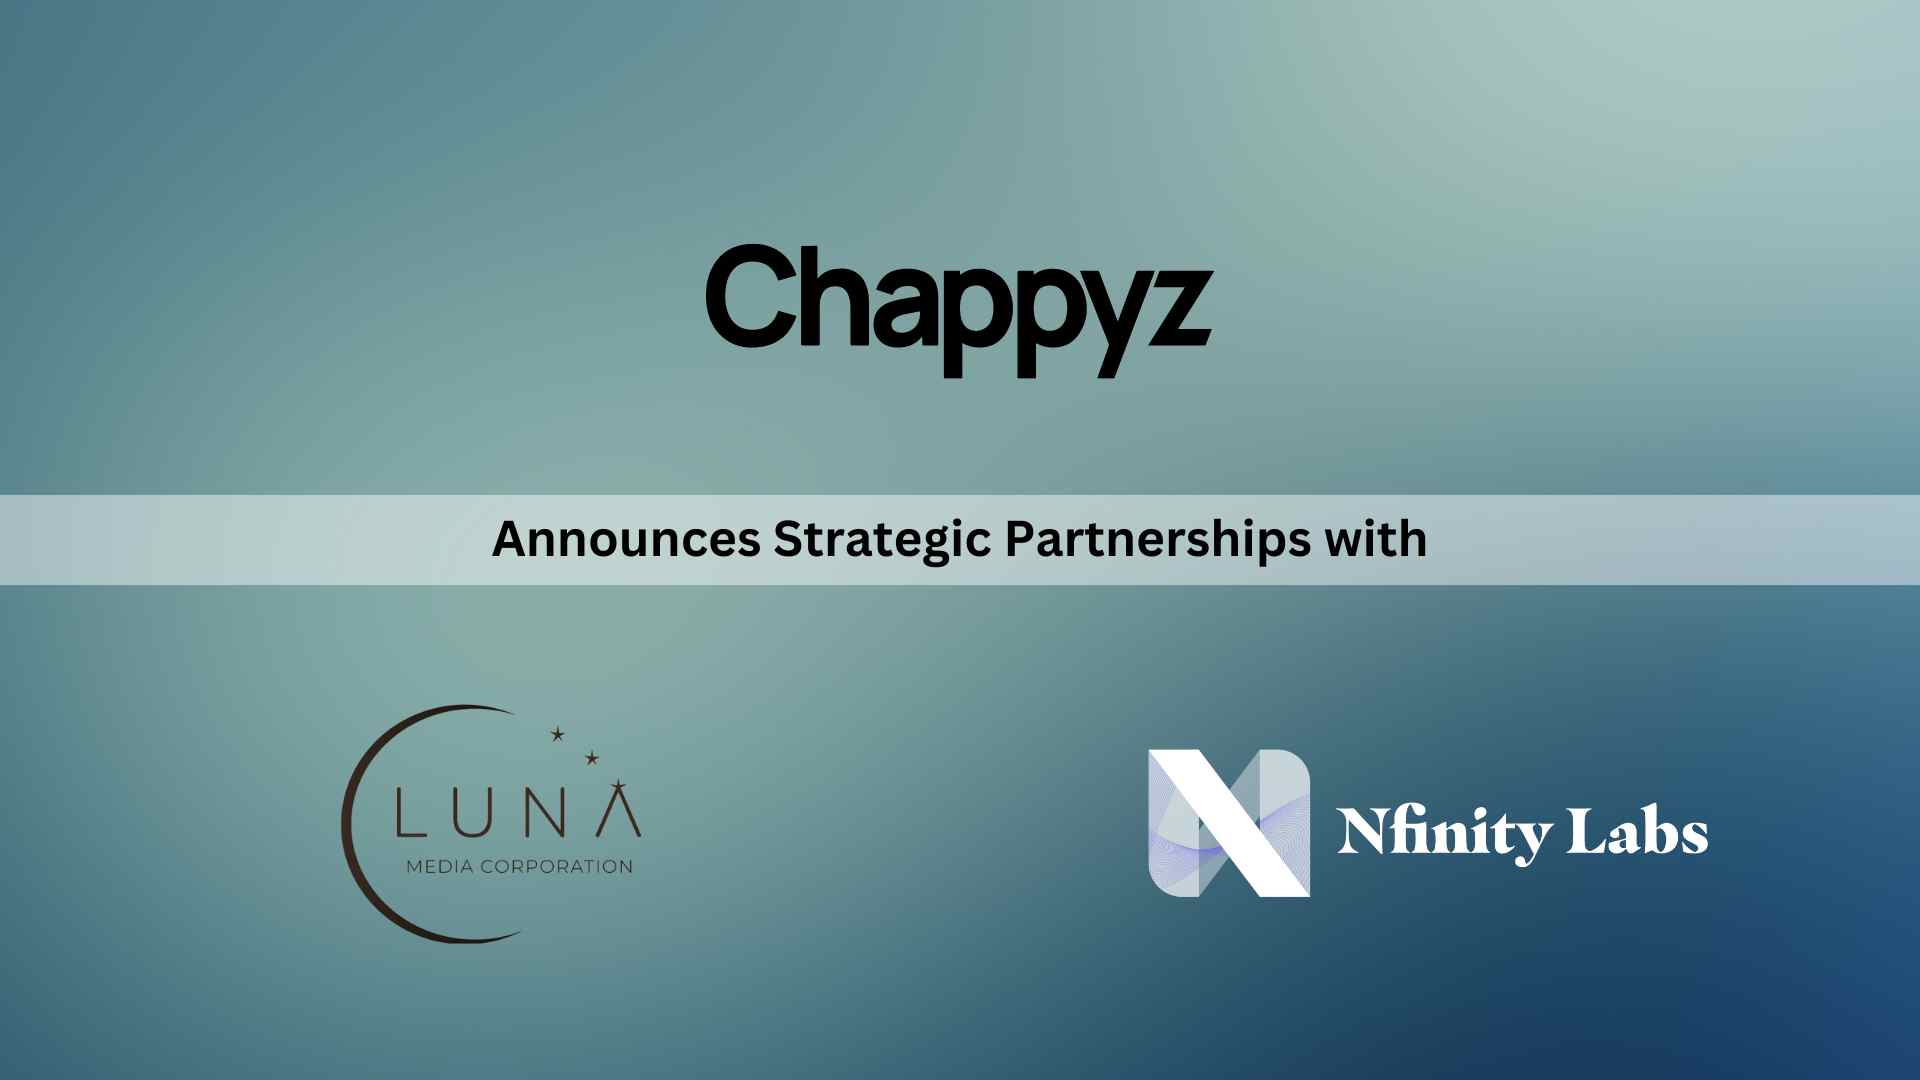 Chappyz Announces Strategic Partnerships with Luna PR and Nfinity Labs